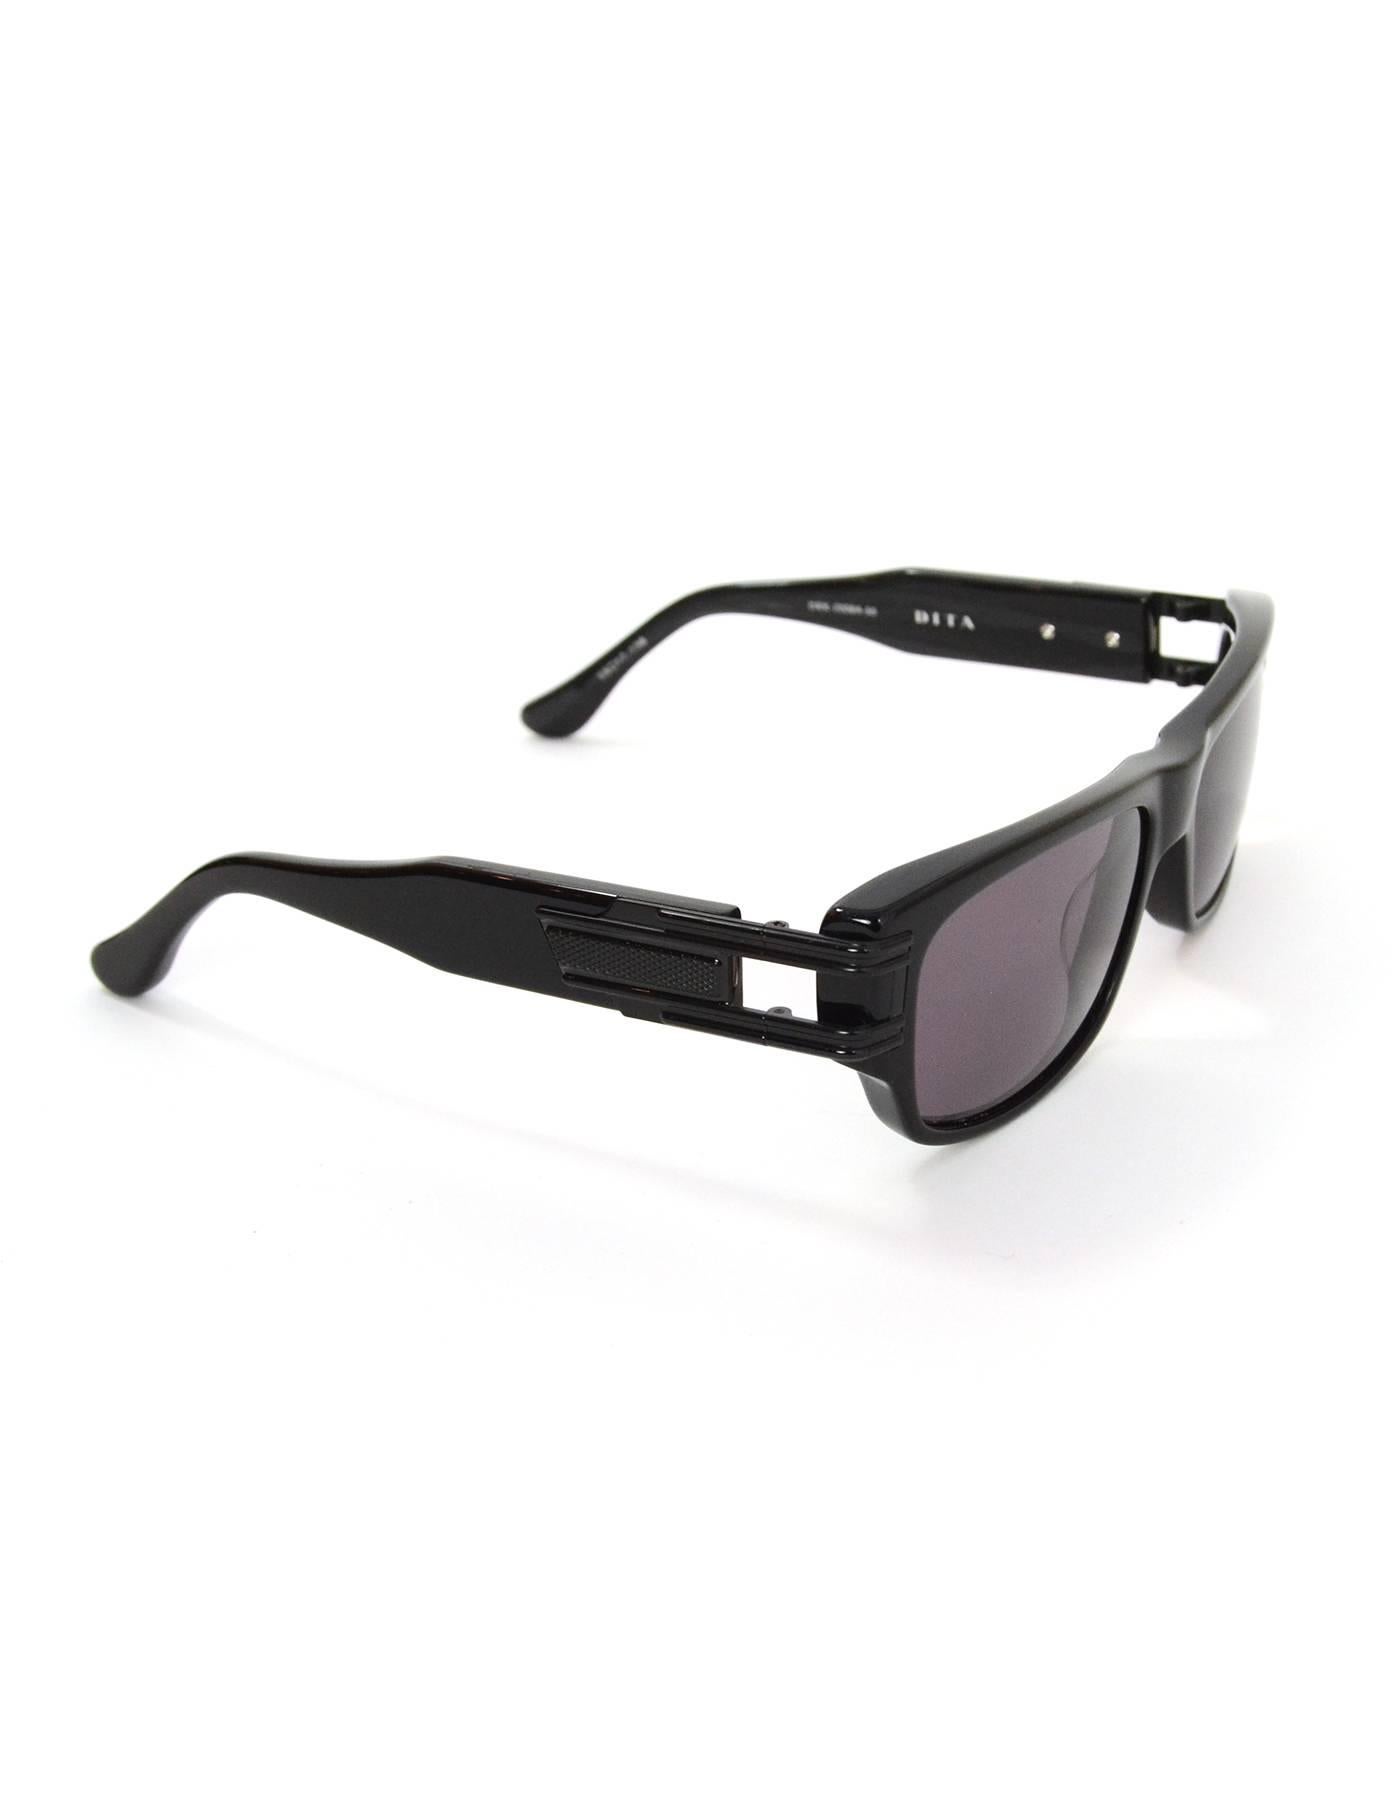 DITA Men's Black Grandmaster - One Sunglasses

Features black hardware at sides.

Made In: Japan
Color: Black
Materials: Resin, metal
Overall Condition: Excellent pre-owned condition
Includes: DITA case and box

Measurements:
Length